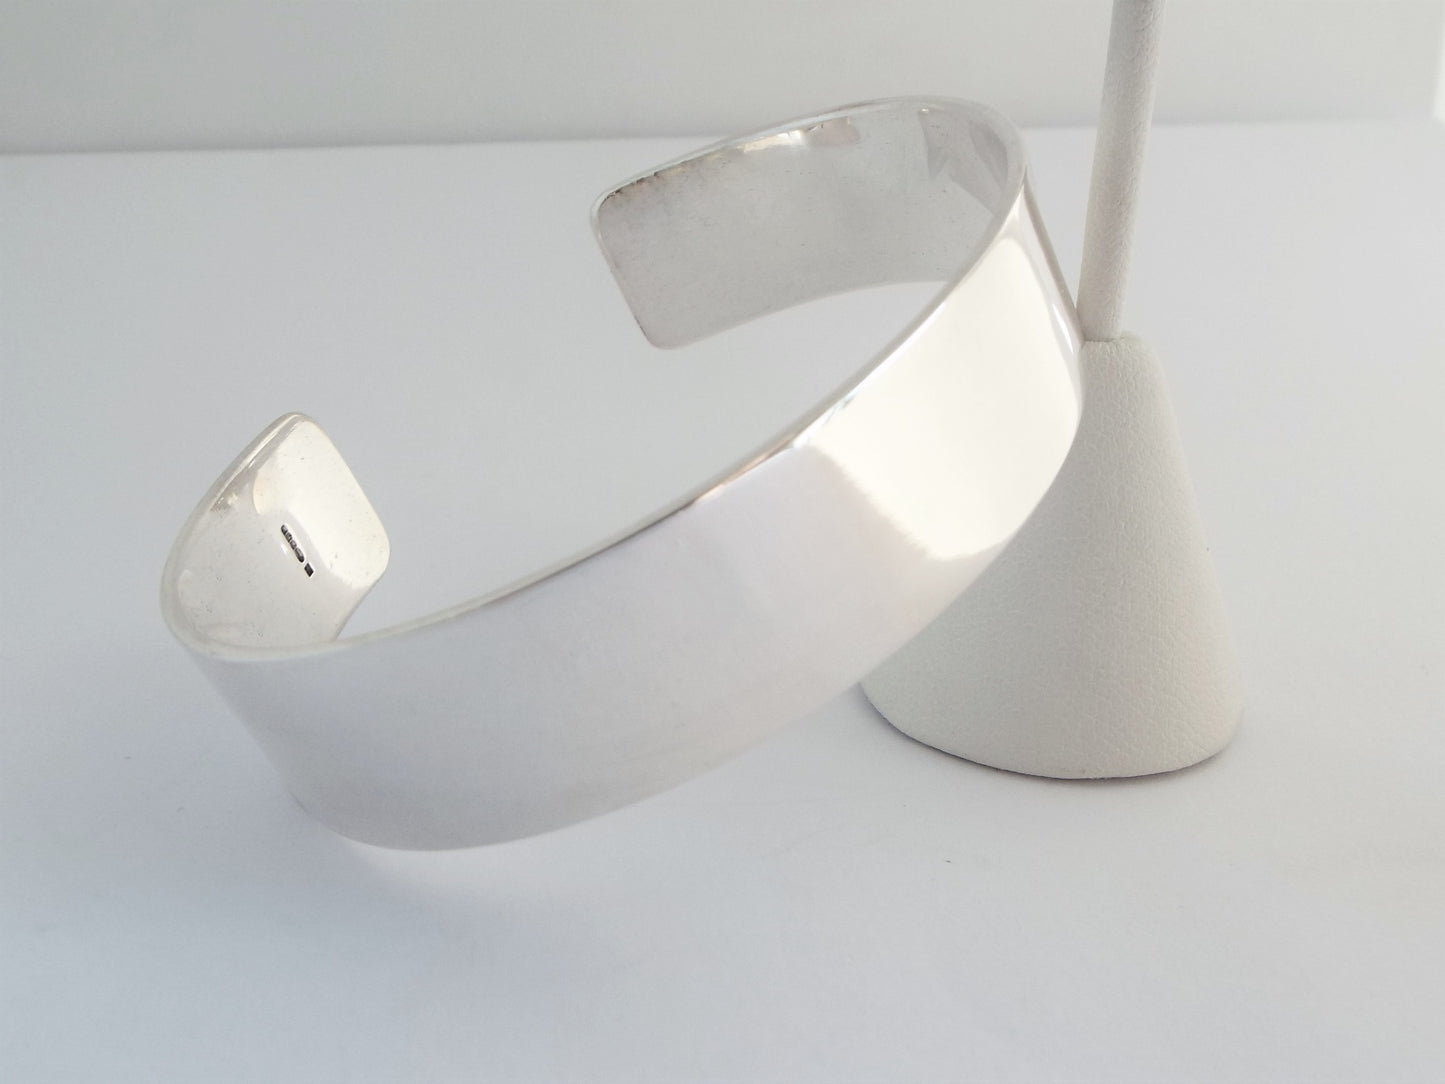 Smooth Polished Silver Cuff Bracelet Wide - Personalised